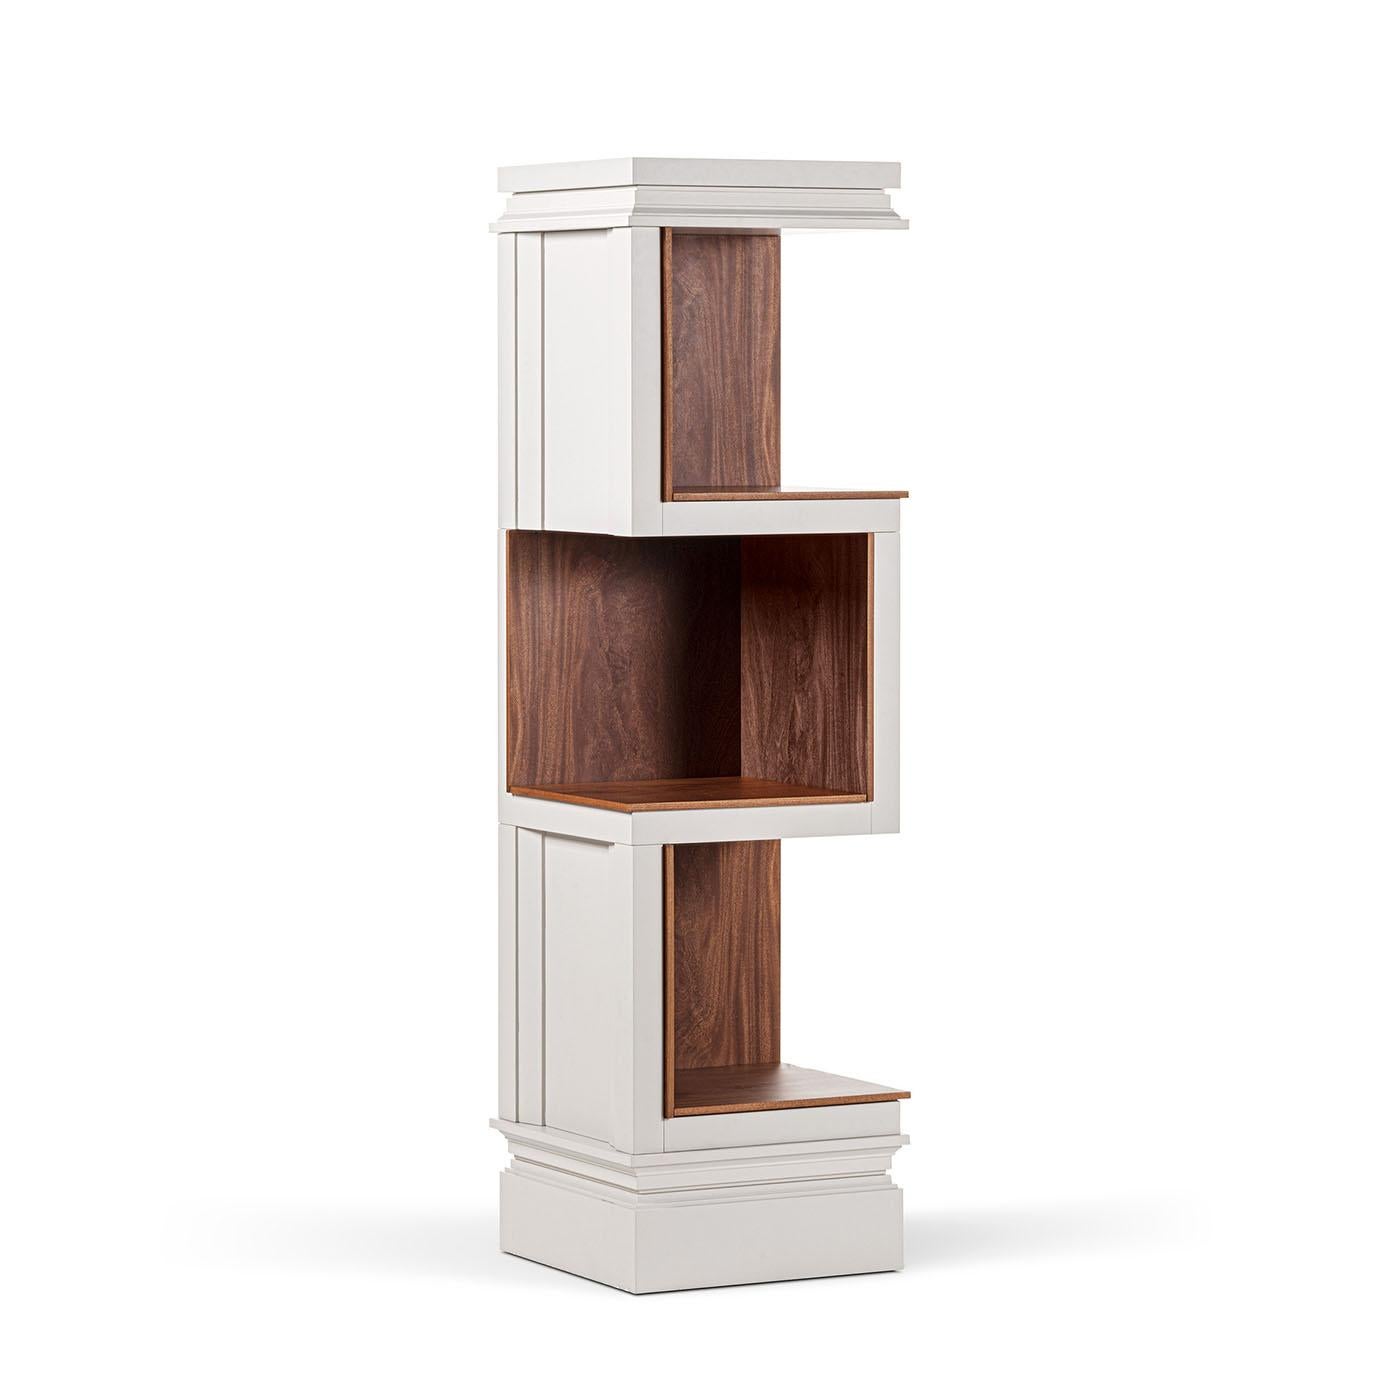 The Akiba lacquered bookcase, expertly crafted from lustrous oak wood, boasts a sleek and sophisticated design, enhanced by its modular composition, allowing for versatility and adaptability to suit any storage needs. The paneles are ingeniously